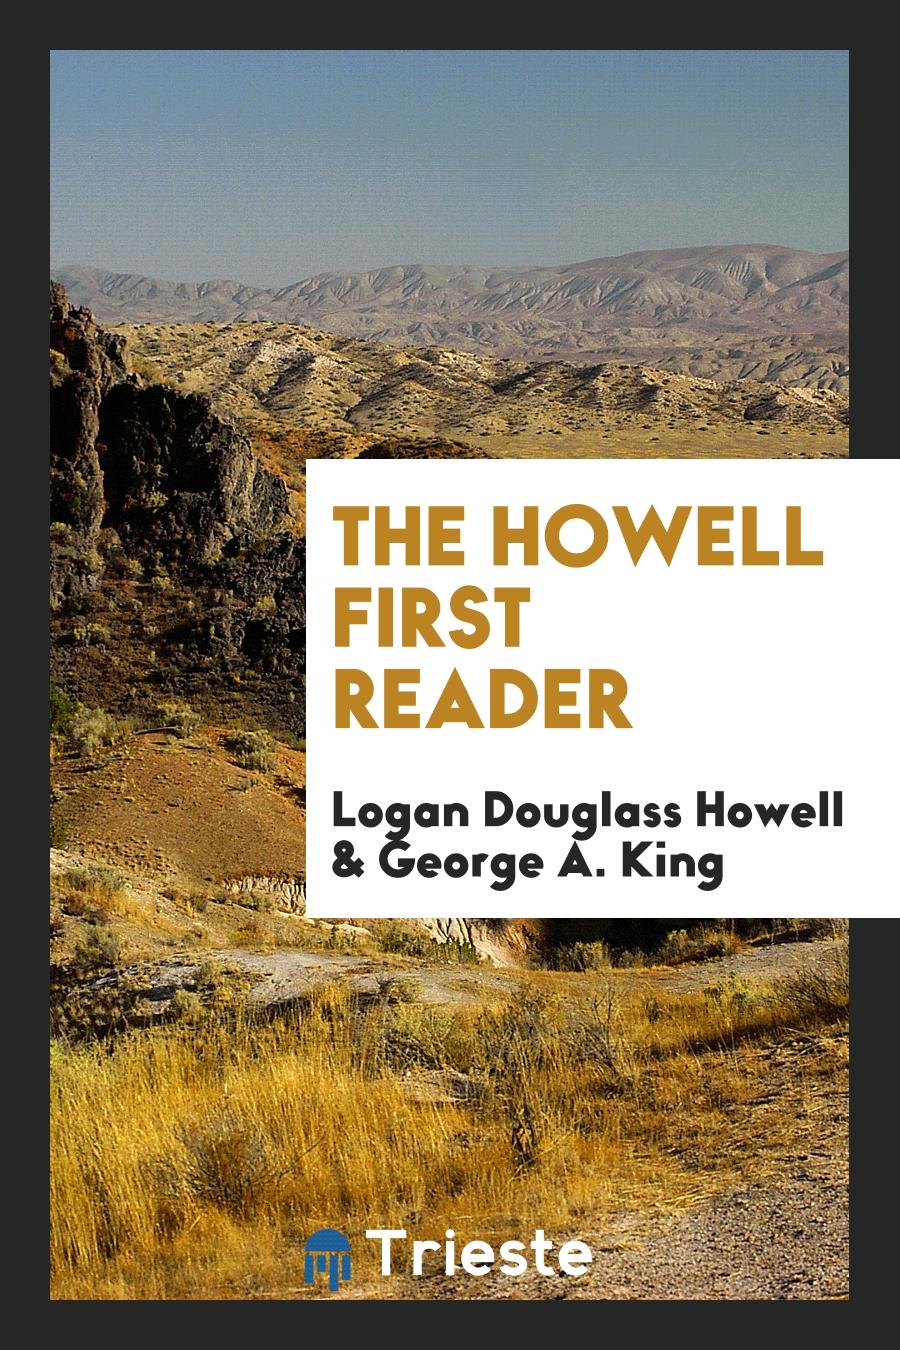 The Howell First Reader